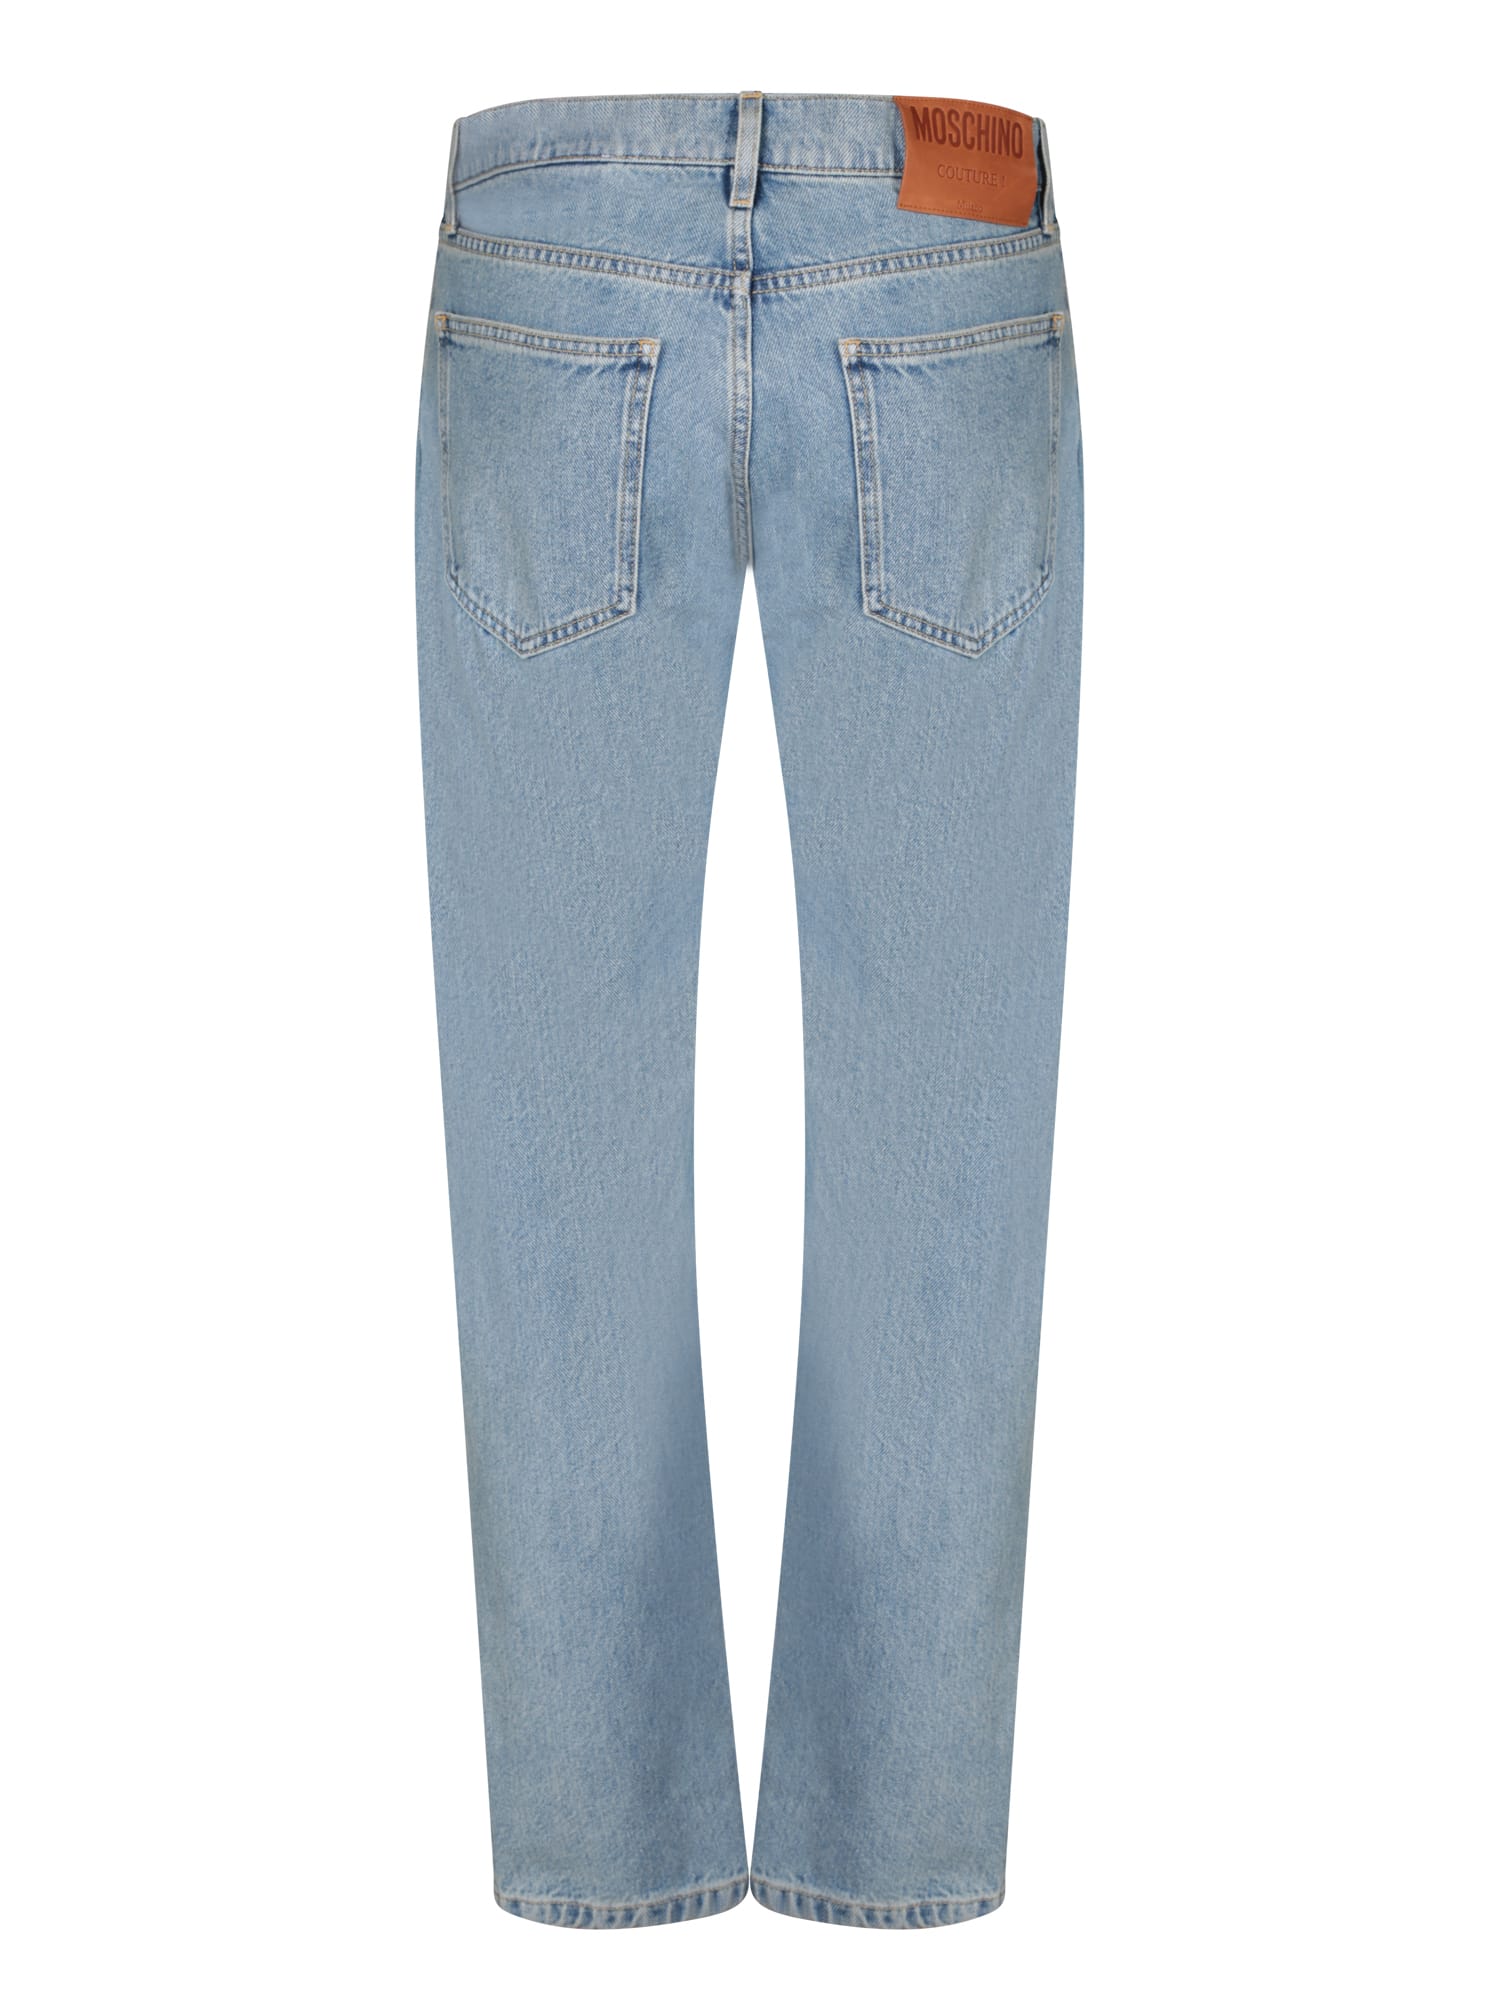 Shop Moschino Regular Fit Blue Jeans By